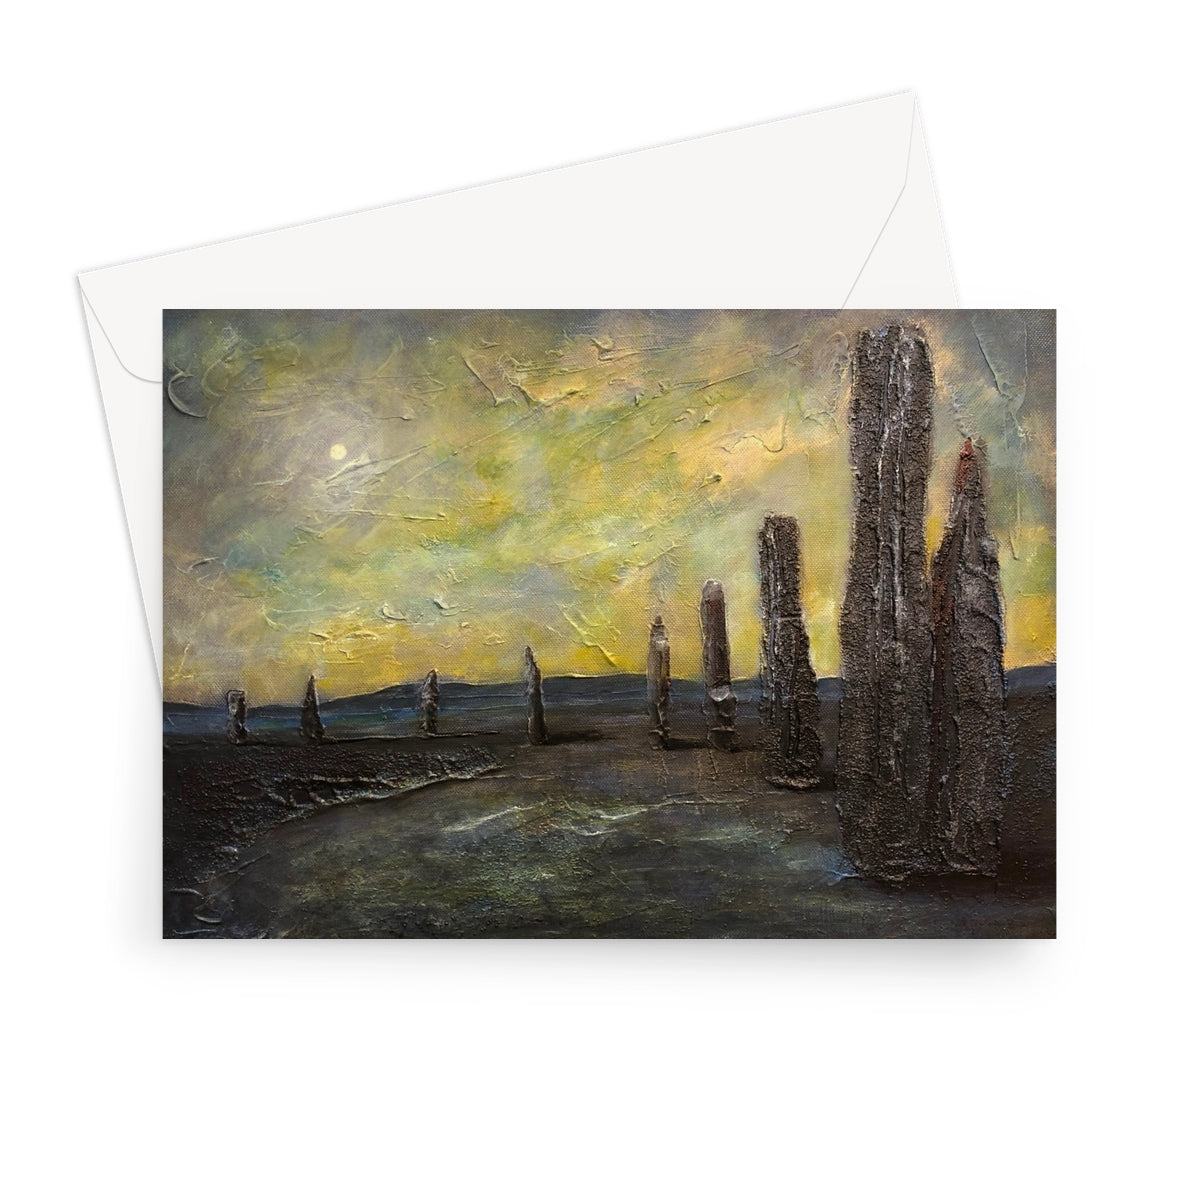 An Ethereal Ring Of Brodgar Art Gifts Greeting Card-Greetings Cards-Orkney Art Gallery-7"x5"-10 Cards-Paintings, Prints, Homeware, Art Gifts From Scotland By Scottish Artist Kevin Hunter